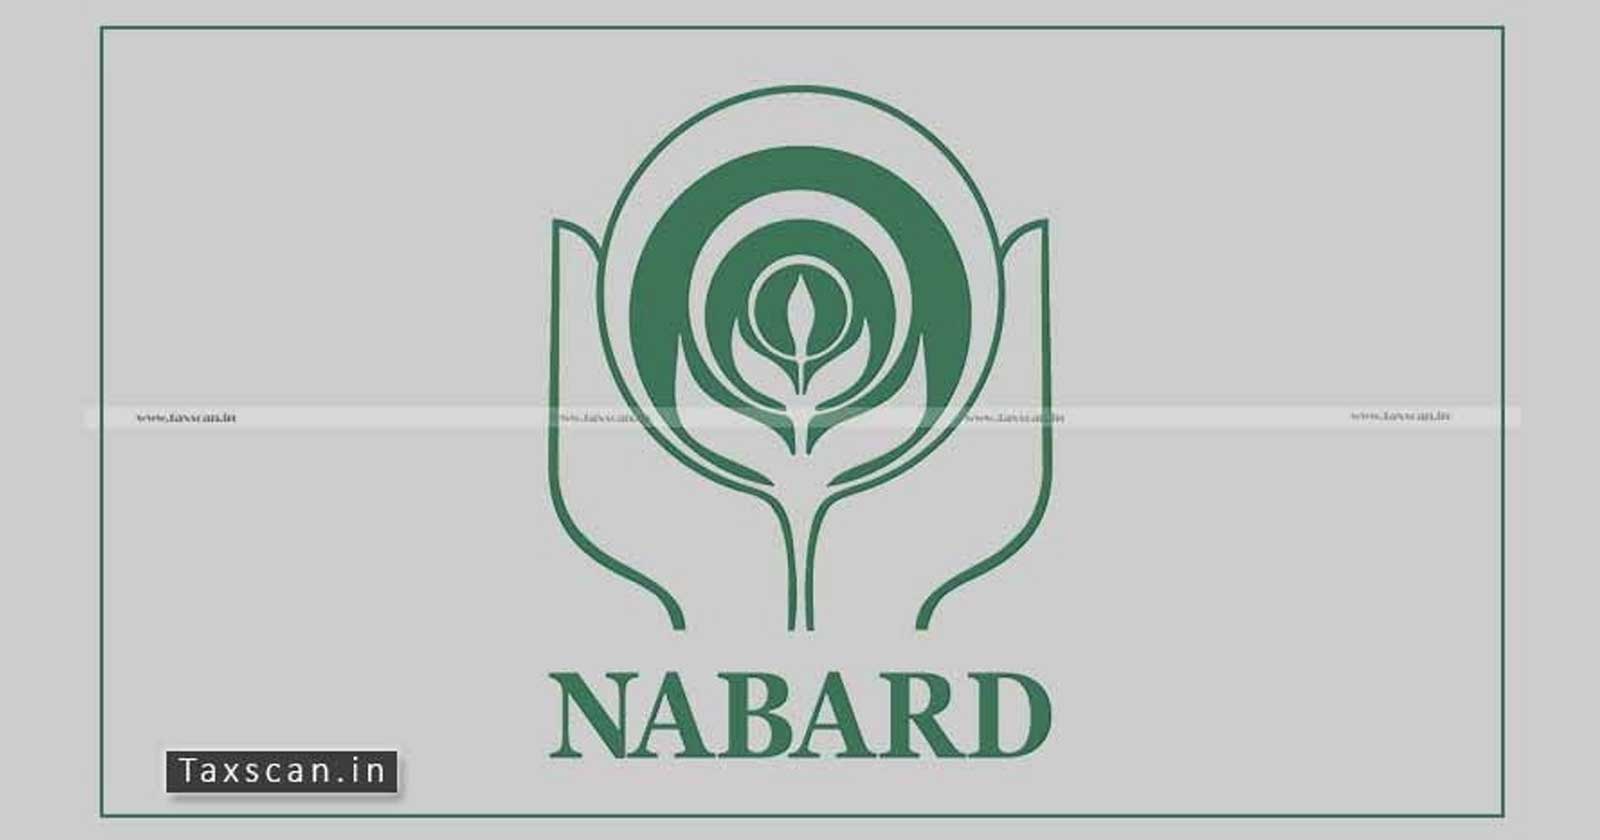 Centre Re-Appoints - Smt. Revathy Iyer - Board of Directors of NABARD - NABARD- Taxscan